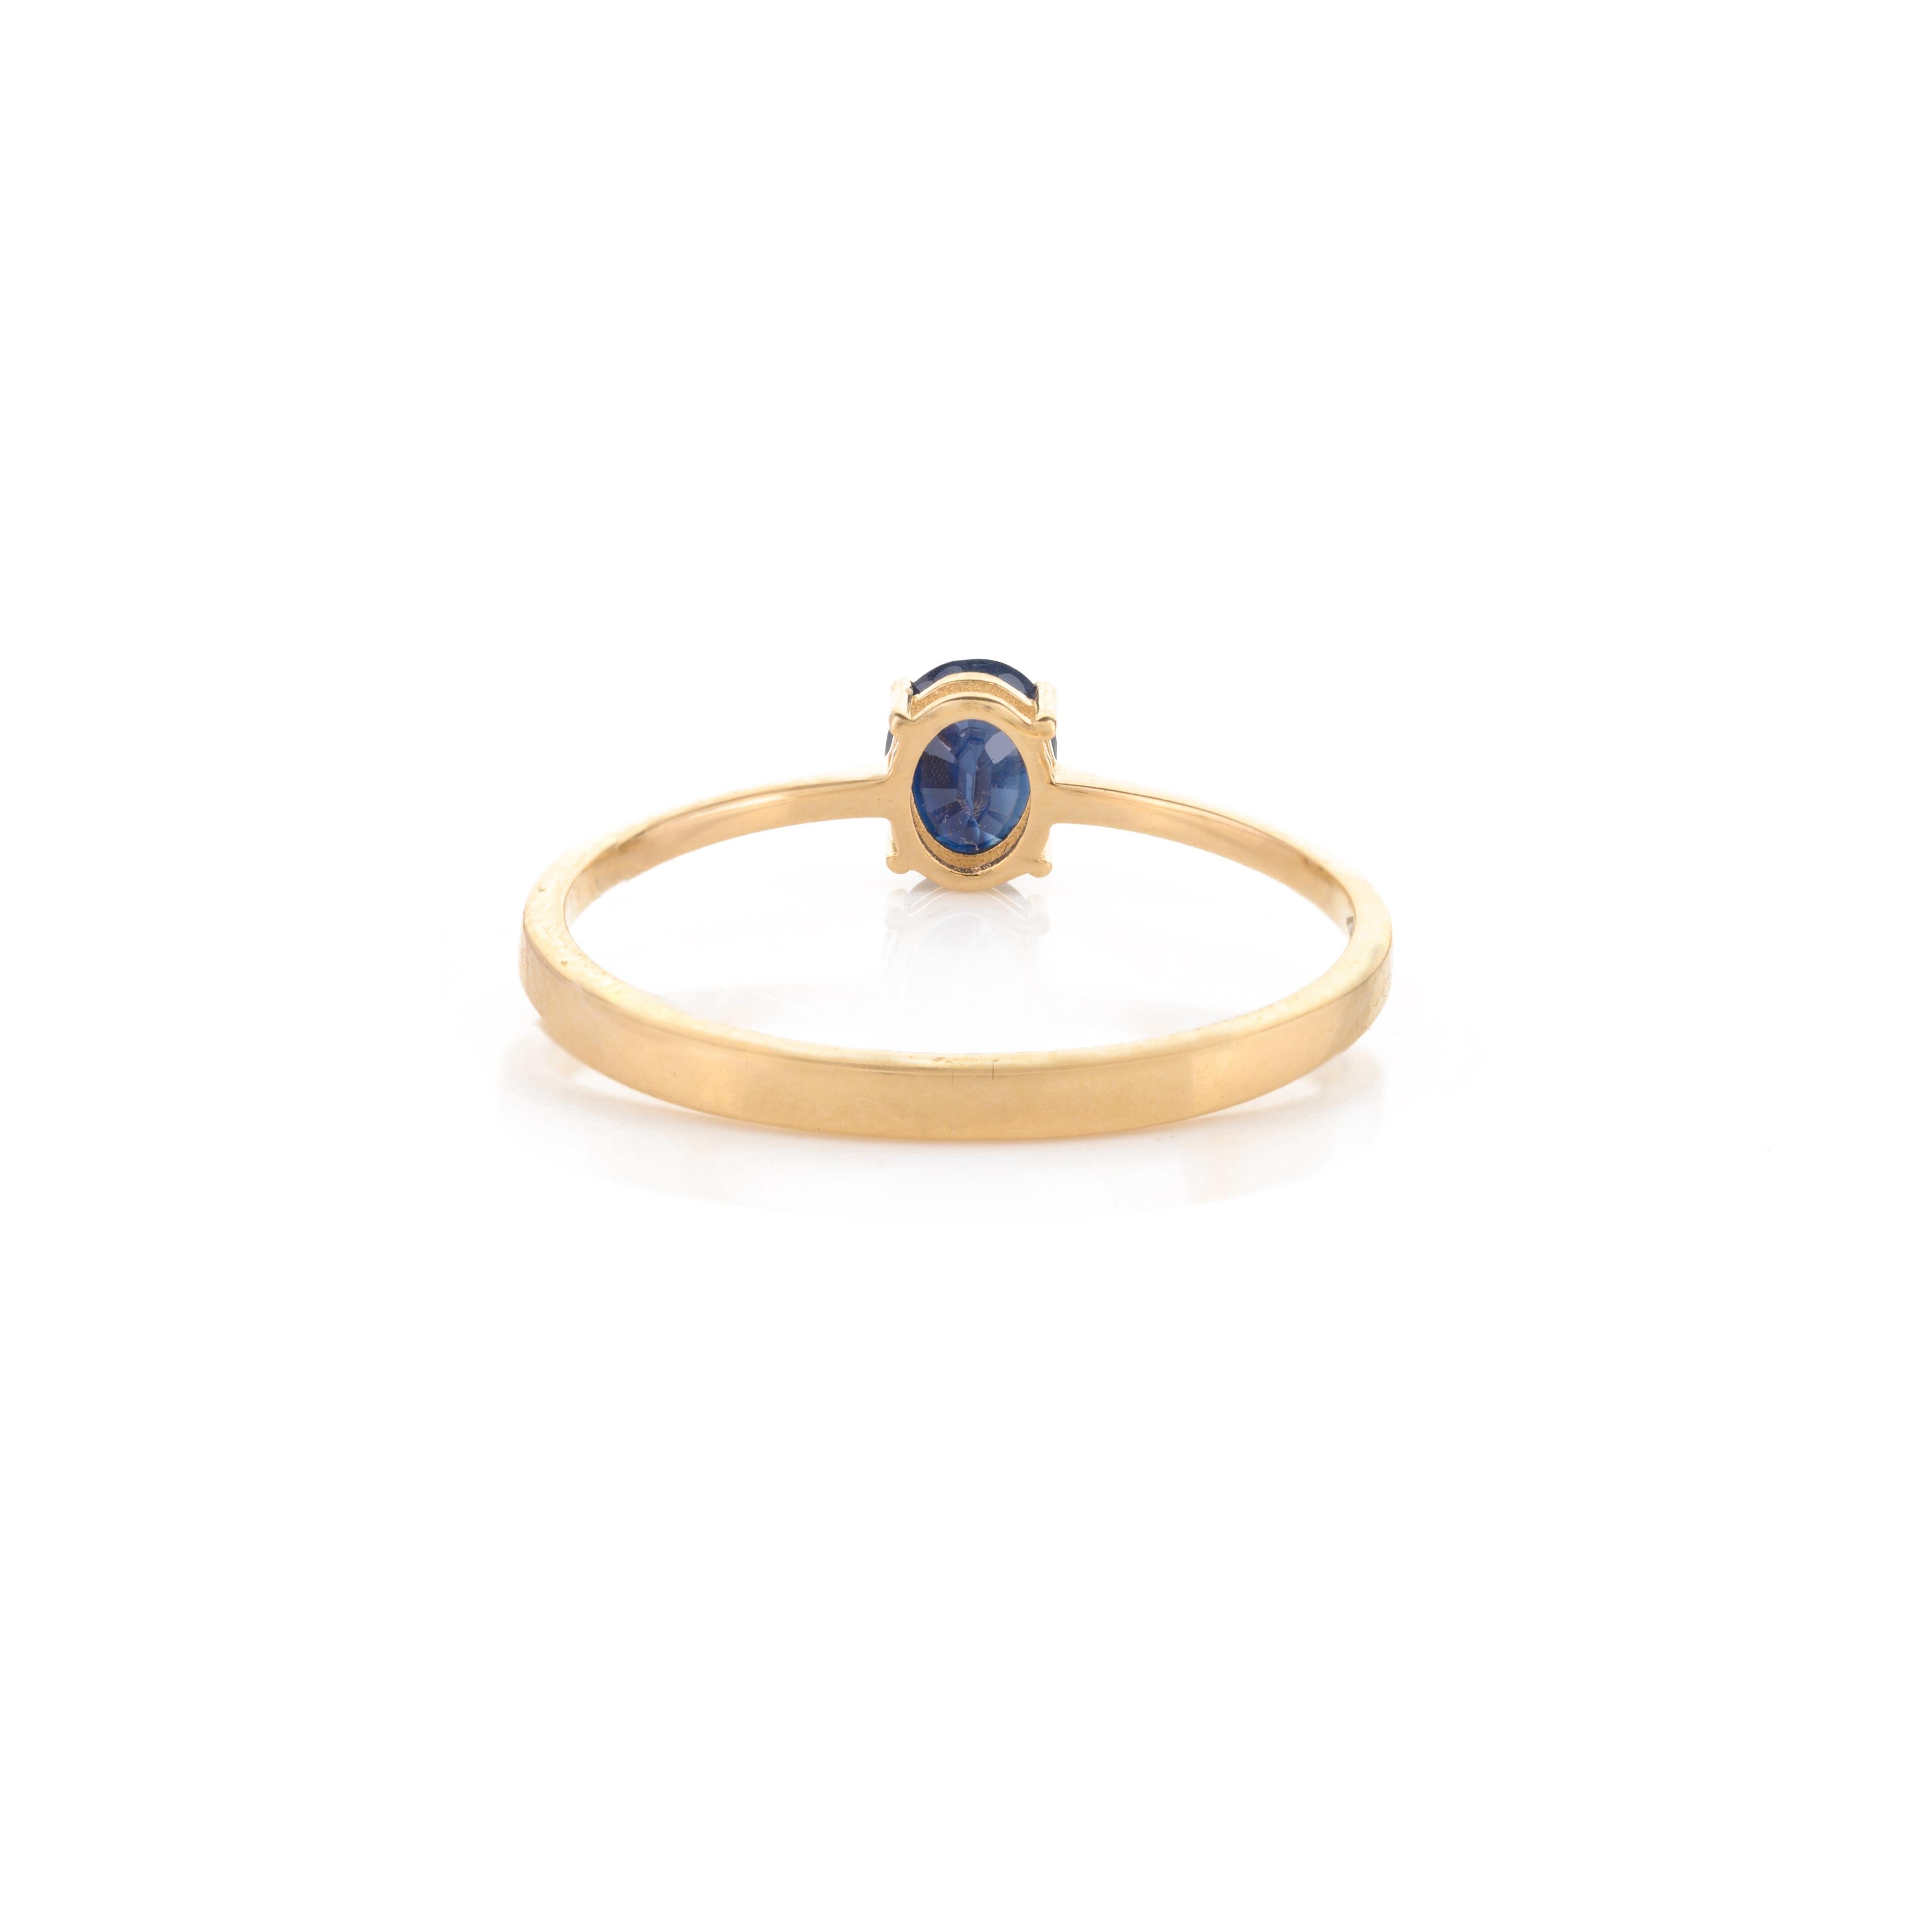 Blue Sapphire Ring, Pendant and Earrings Jewelry Set Made in 18k Yellow Gold For Sale 7